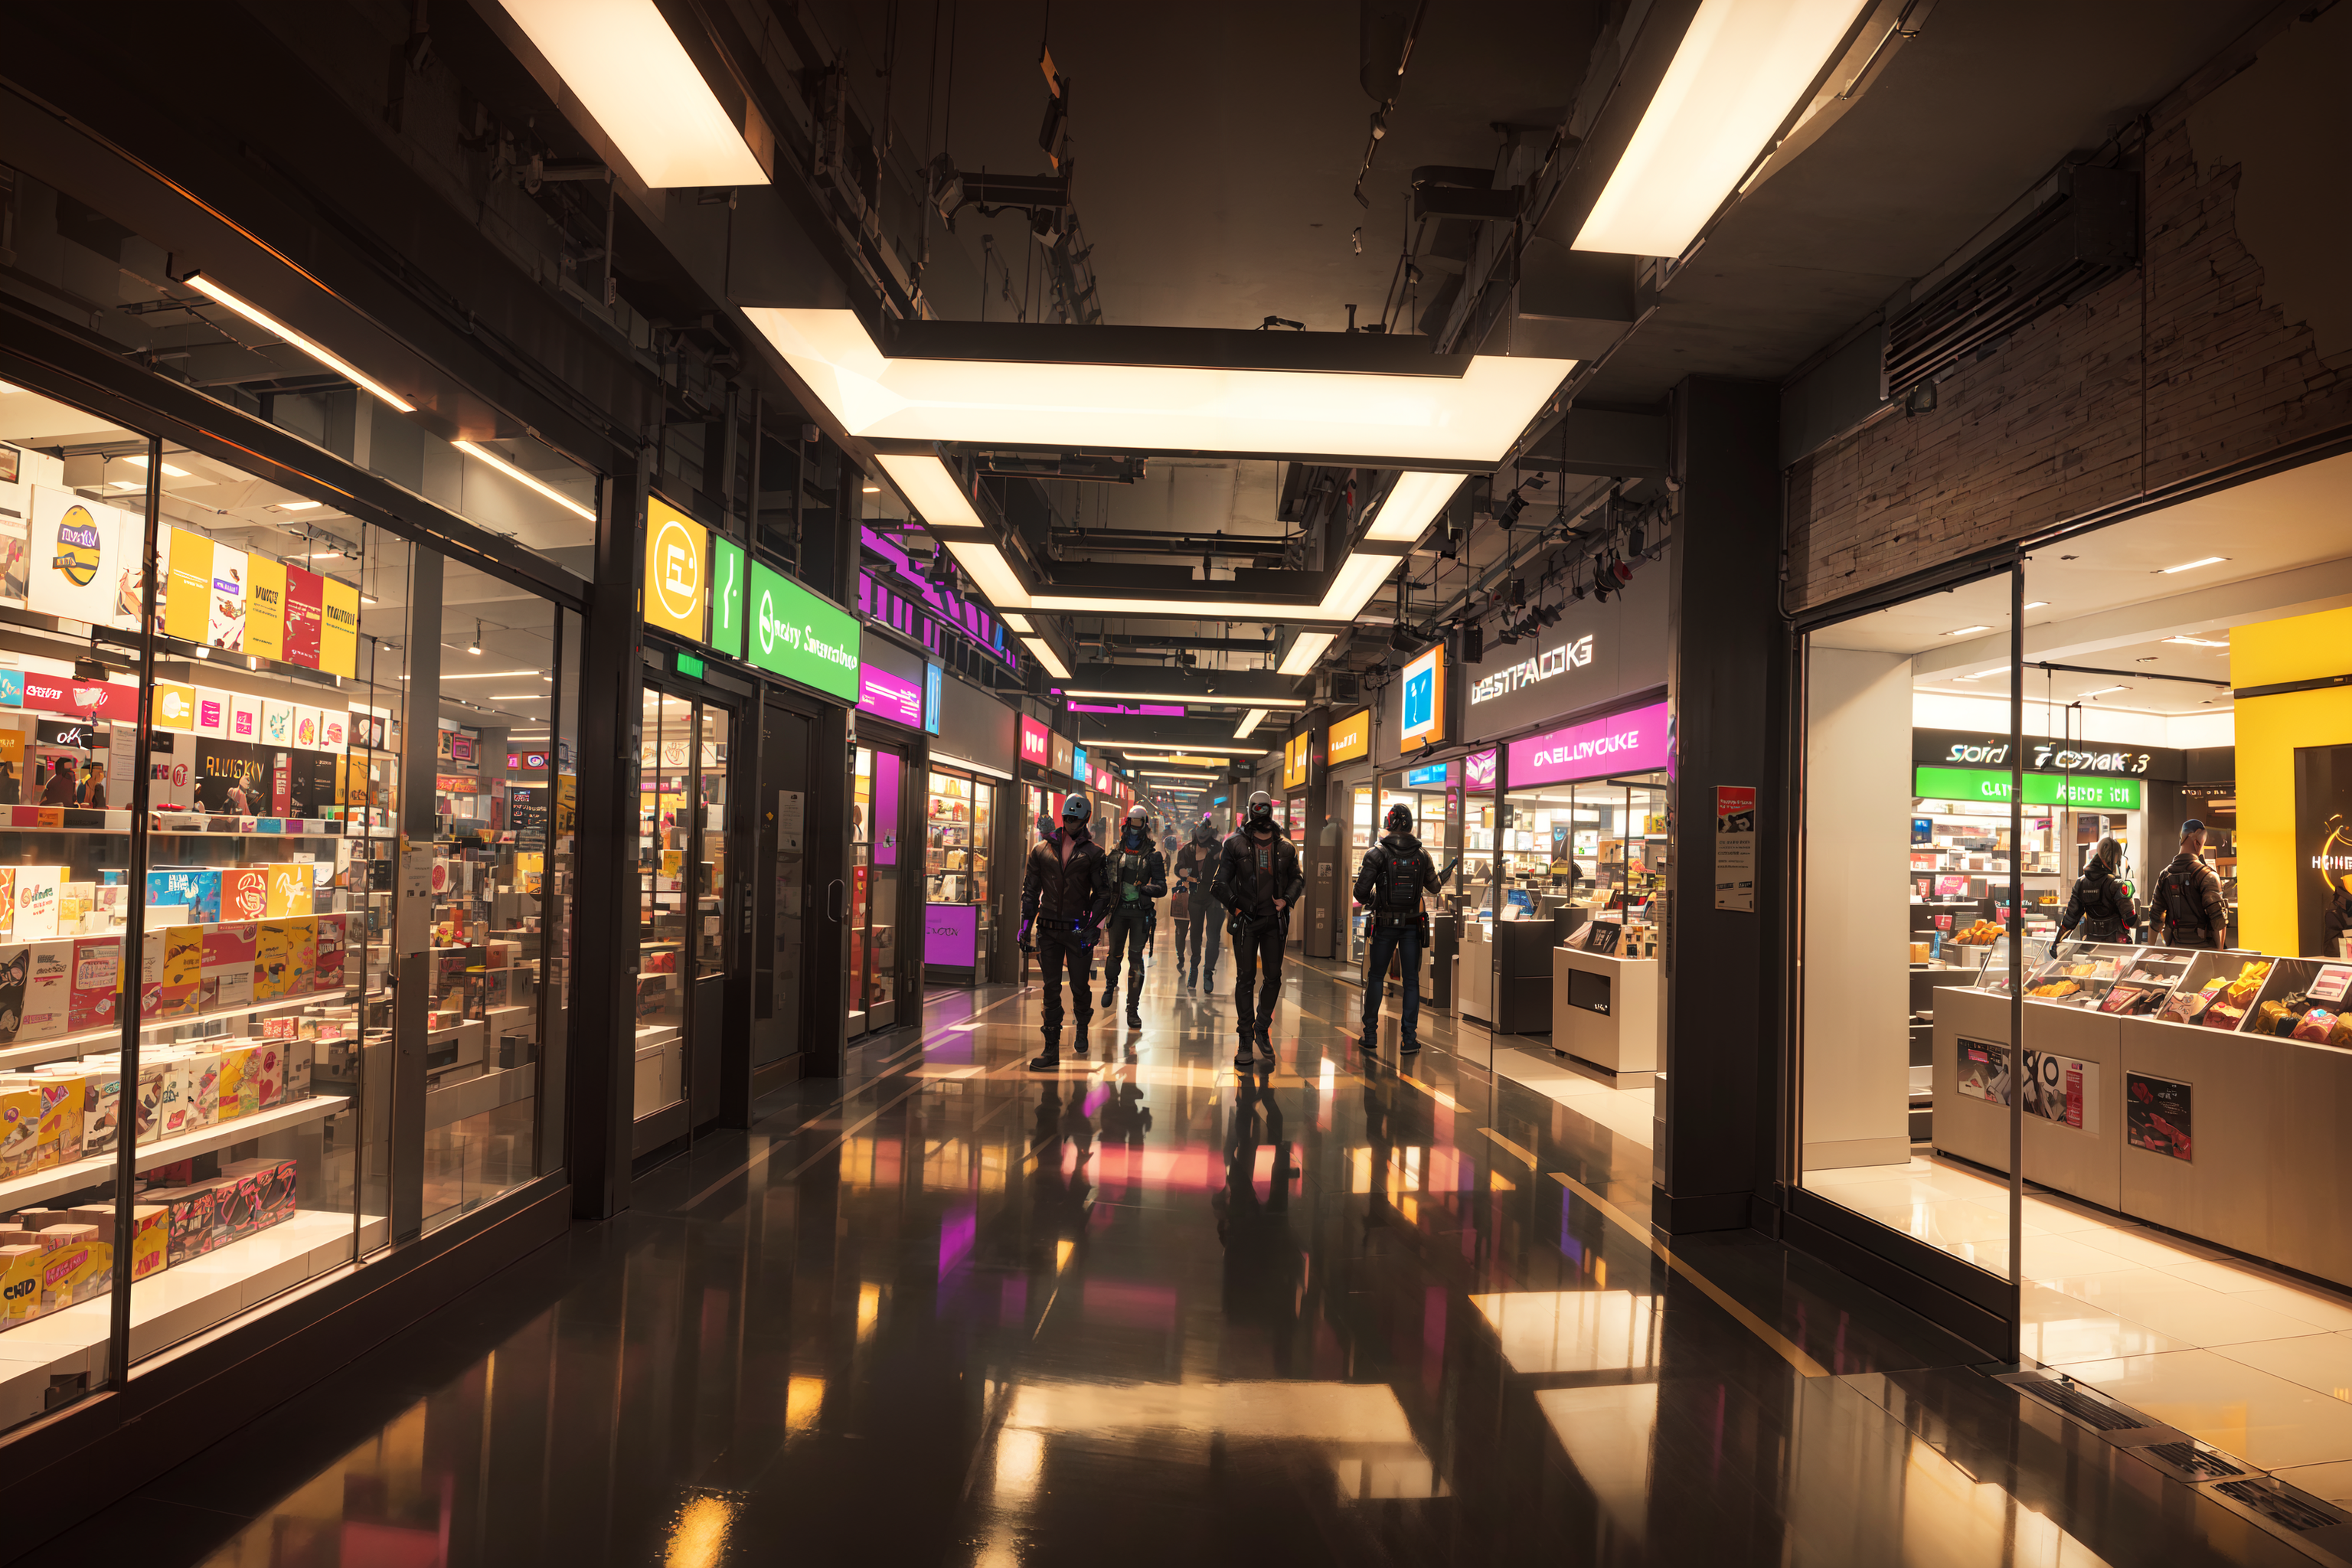 General 3072x2048 AI art Stable Diffusion cyberpunk neon street art shopping mall interior reflection people lights mall sign